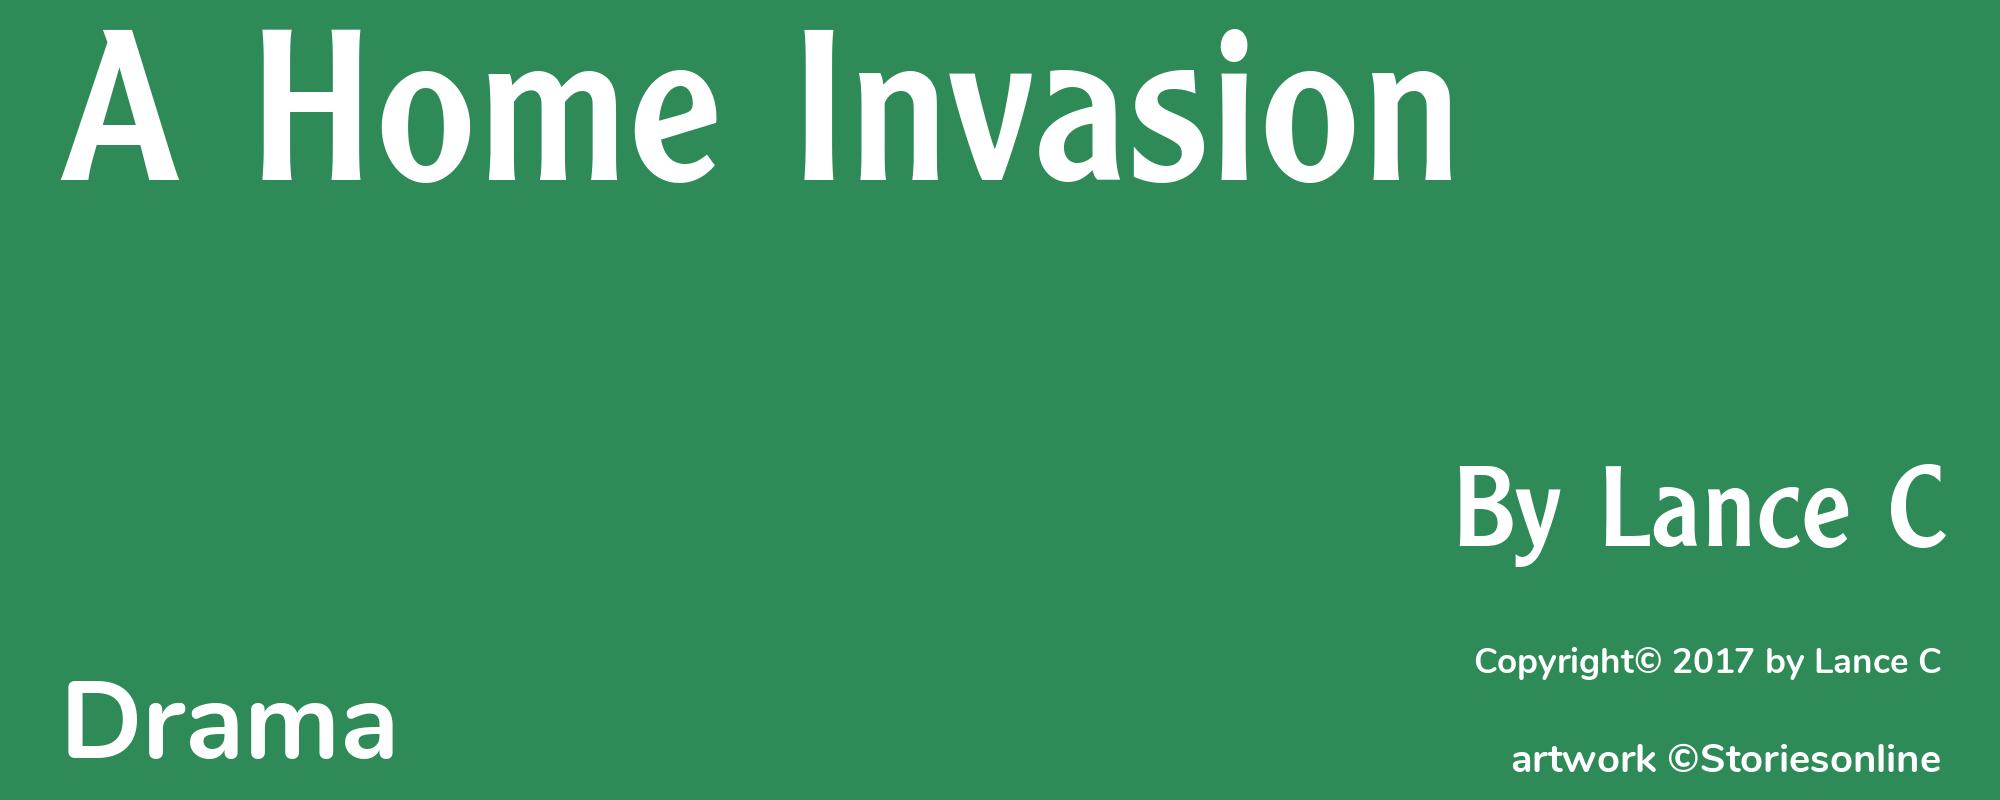 A Home Invasion - Cover